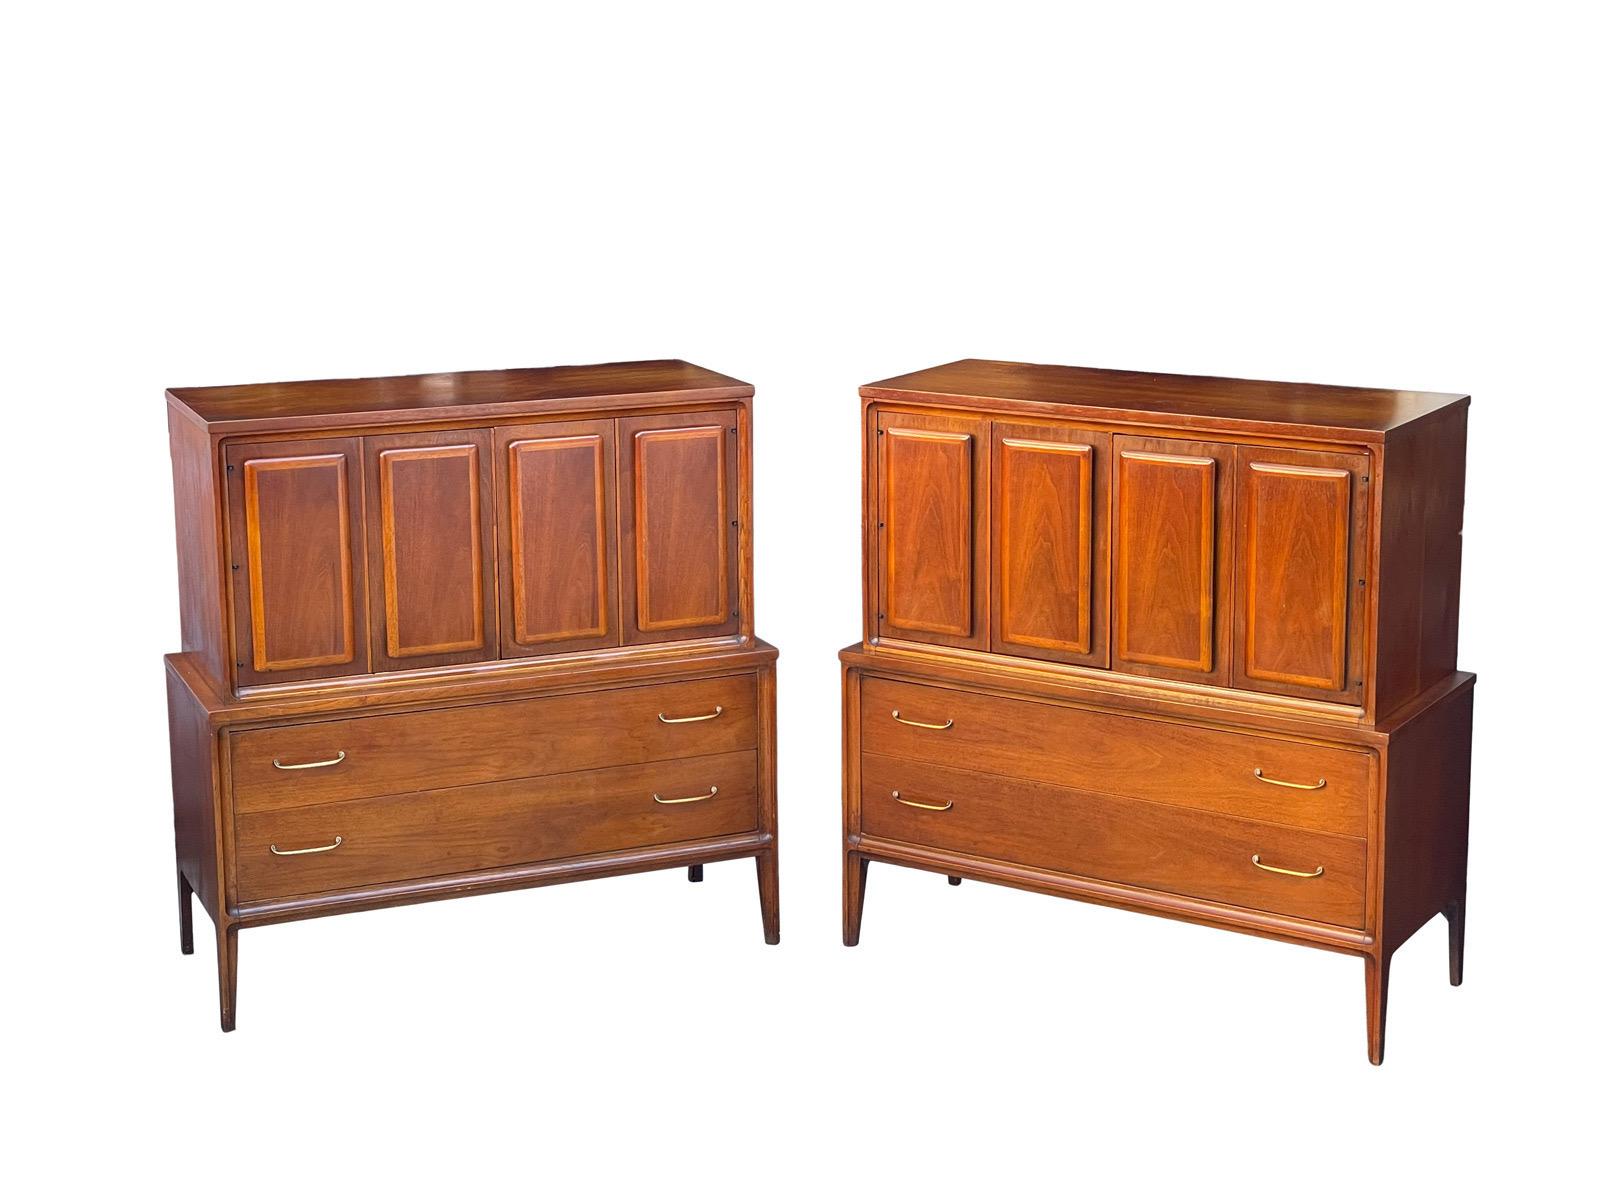 Set of 2 Mid-Century Modern gentlemen’s chest by Broyhill. Part of the rare Forward 70 collection. Beautifully crafted cabinet with gently rounded relief panels on the doors. Fold these doors open to reveal a large storage space inside. Removable